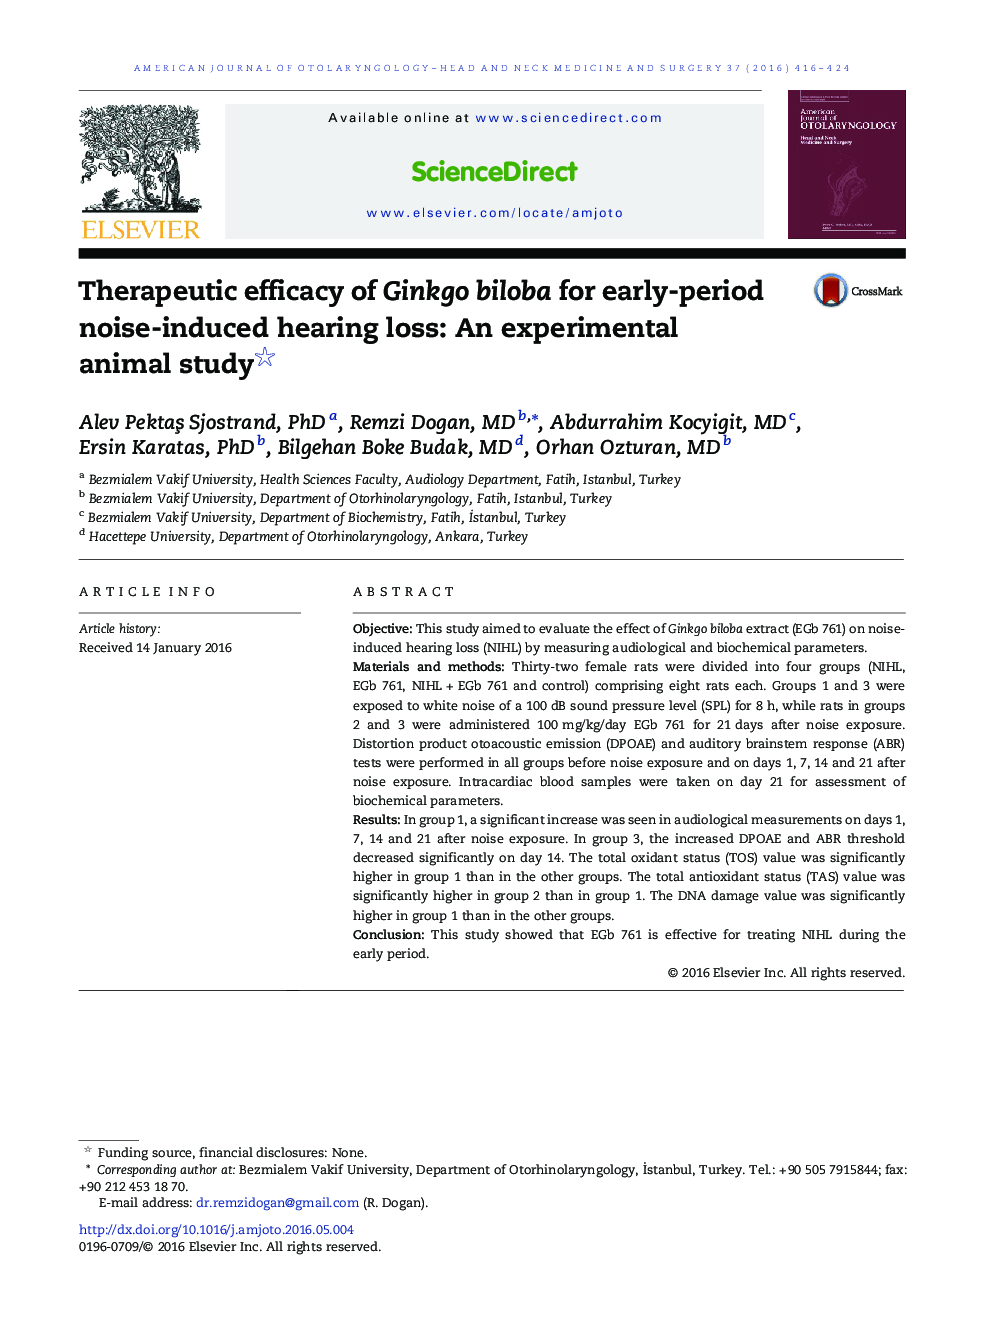 Therapeutic efficacy of Ginkgo biloba for early-period noise-induced hearing loss: An experimental animal study 